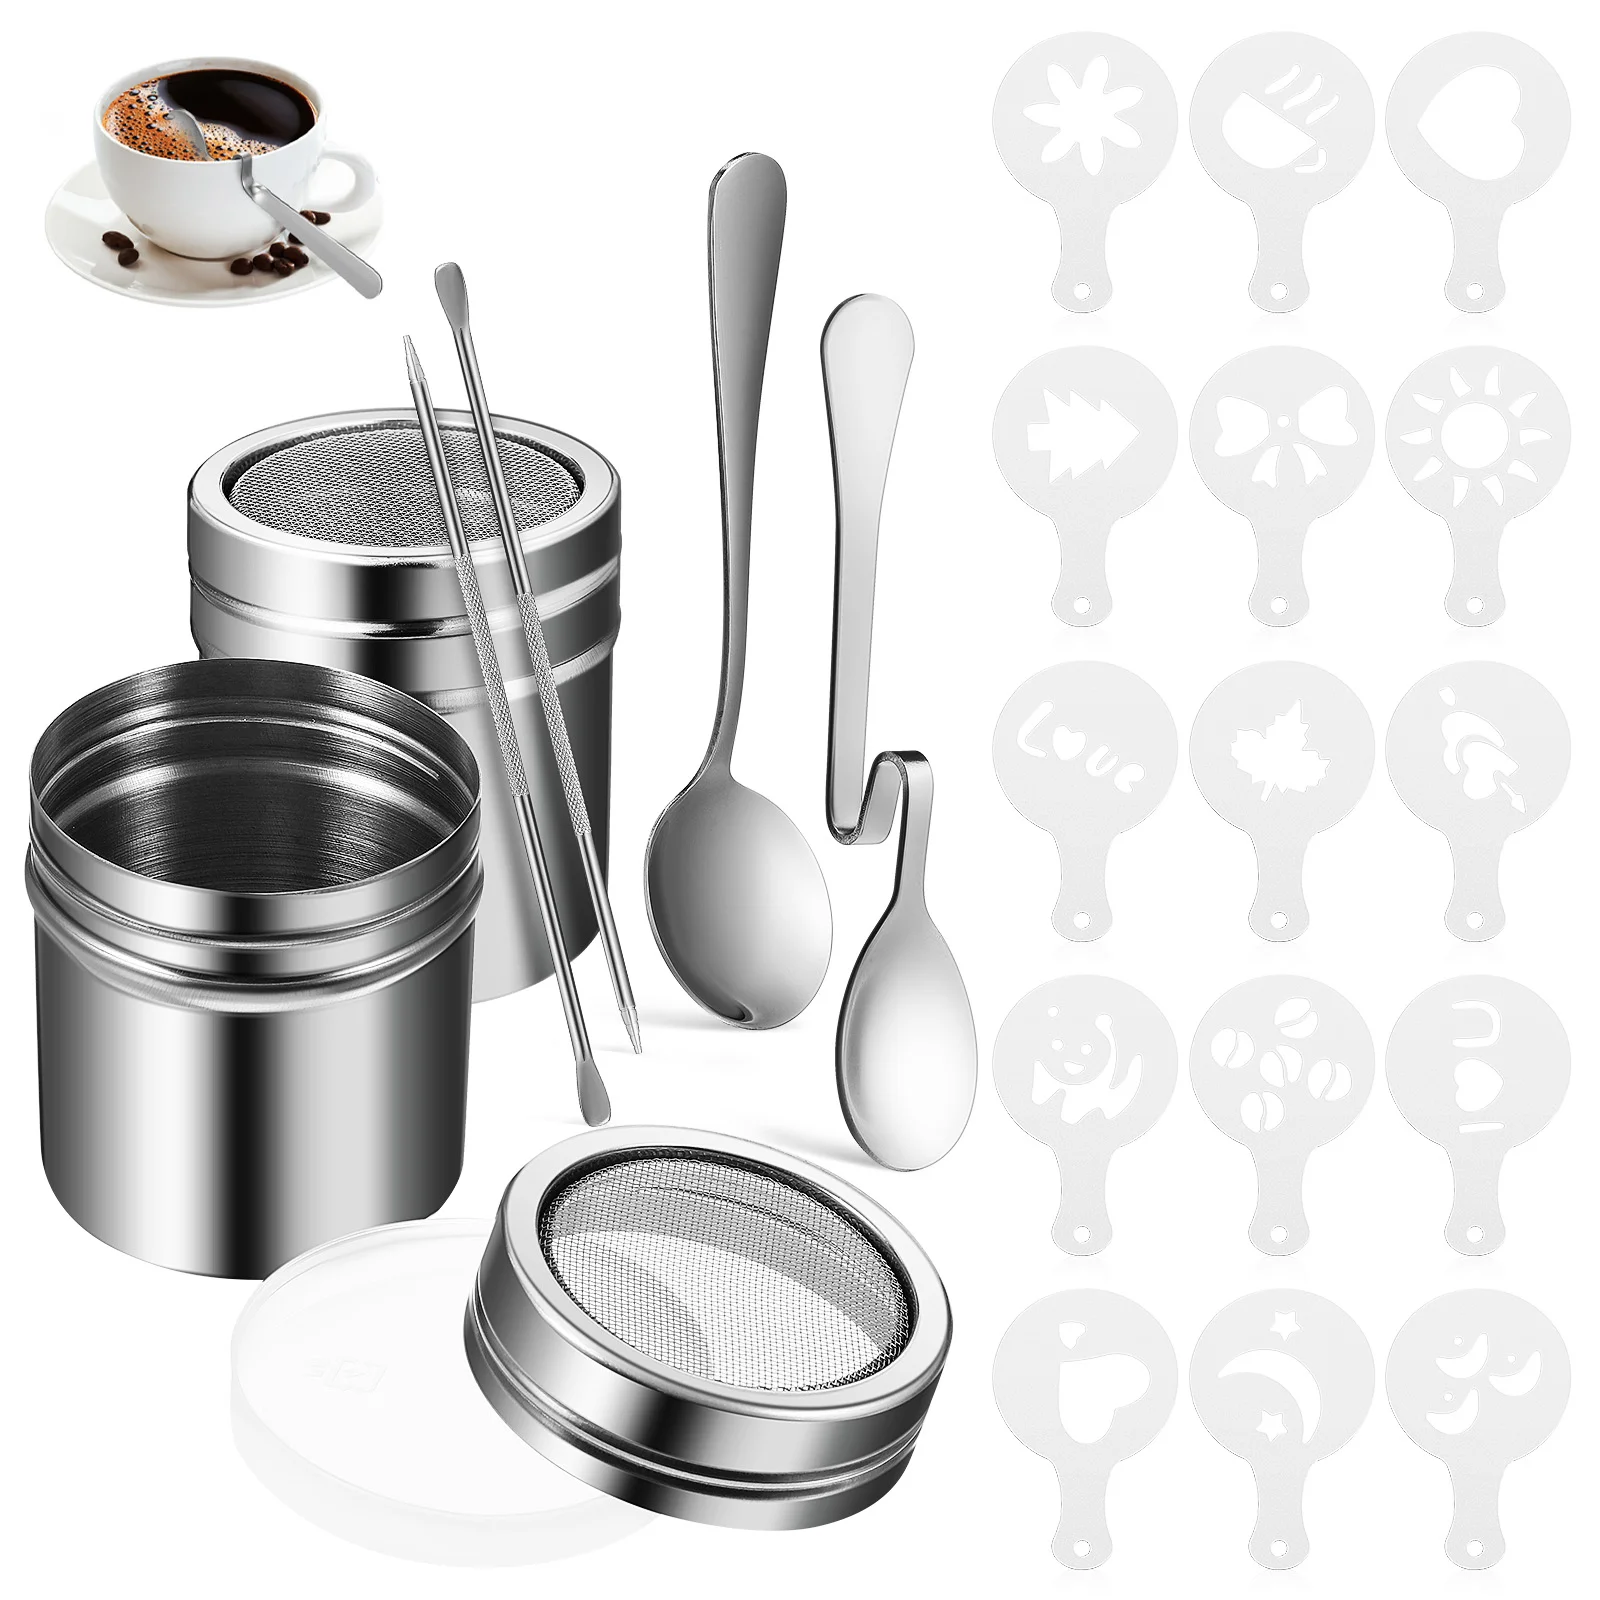 

Stainless Steel Chocolate Shaker Cocoa Flour Coffee Sifter Or Coffee Stencils Template Strew Pad Duster Spray Tools